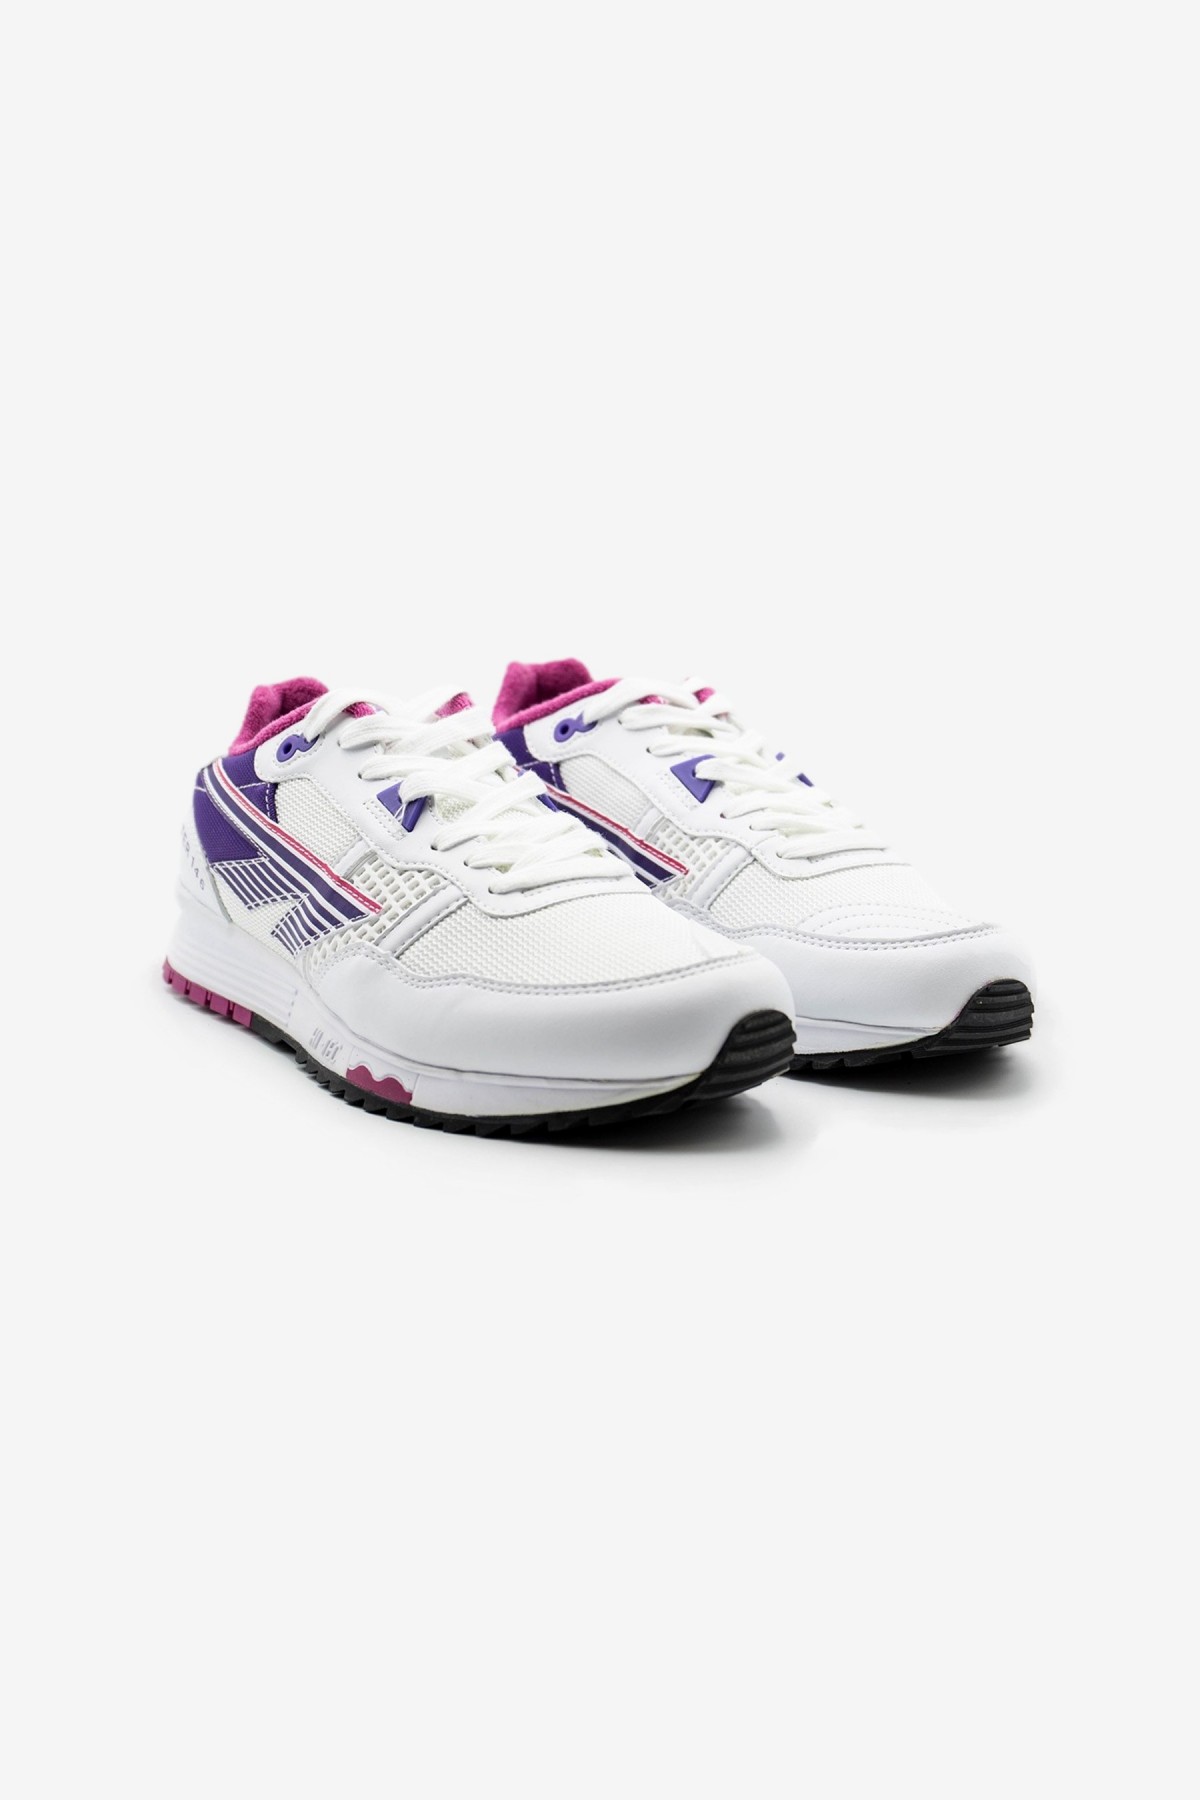 Hi-Tec HTS Badwater 146 ABC in White / Purple / Beetroot